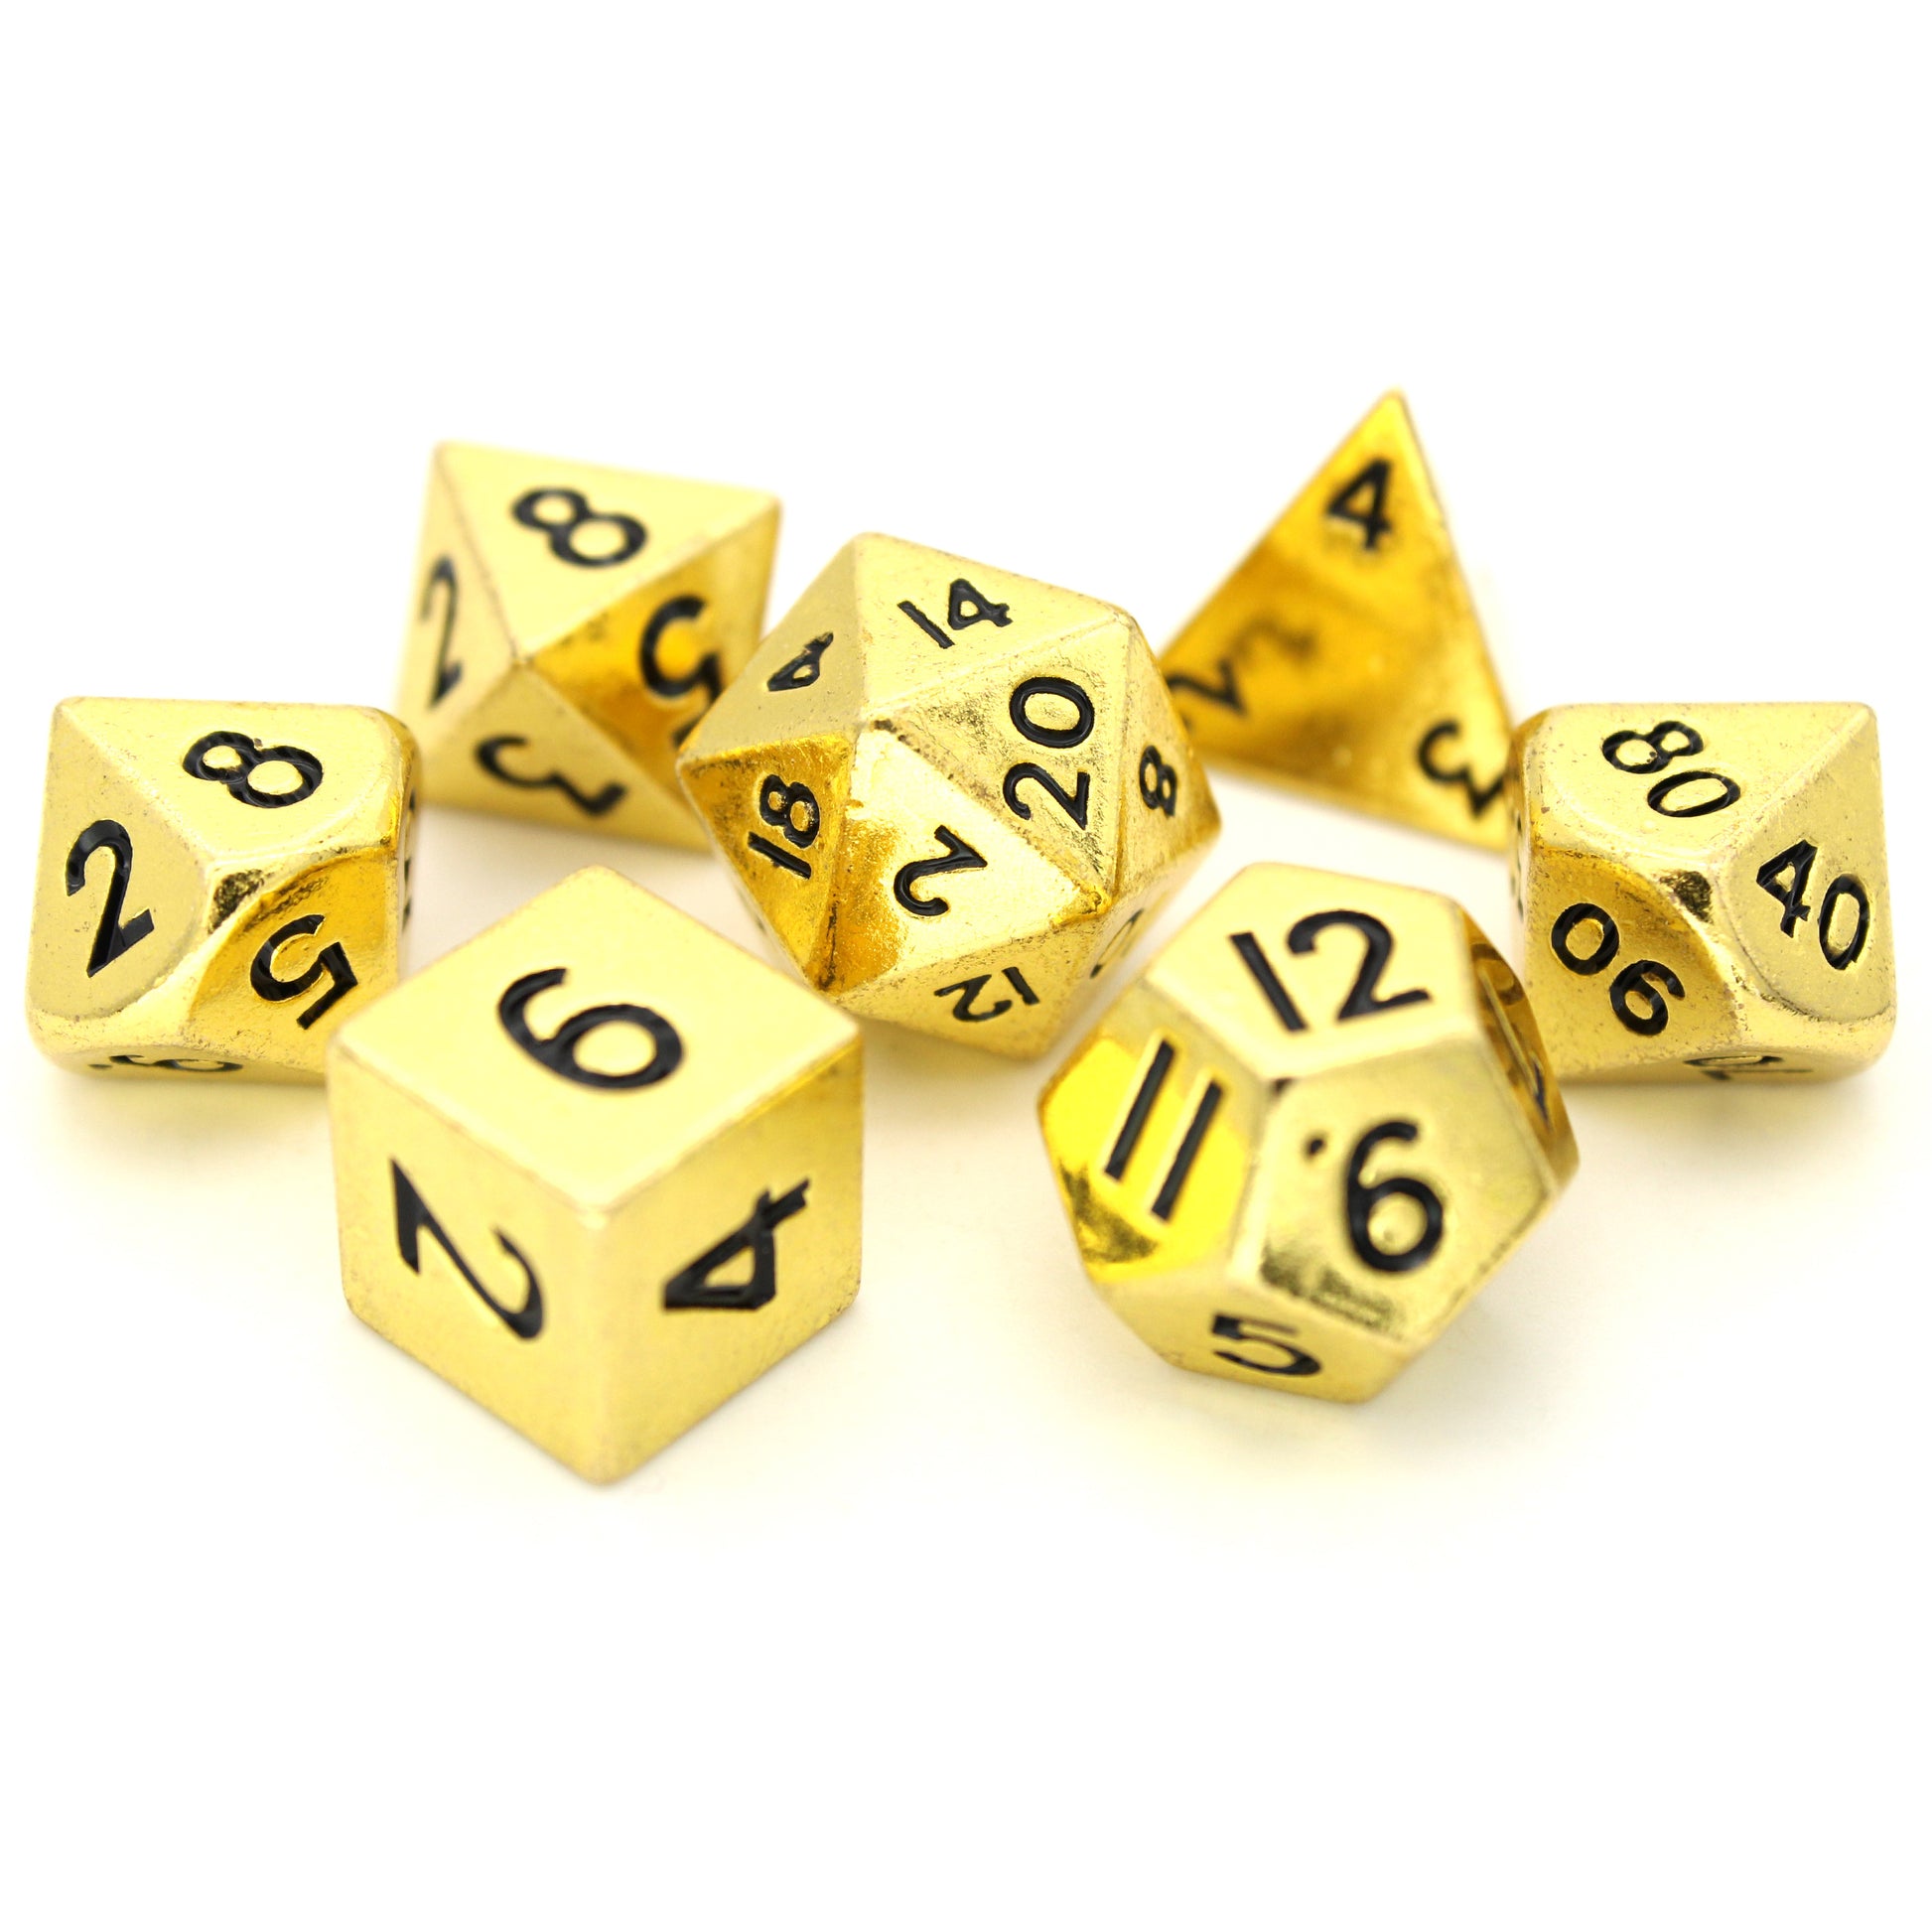 Ankle Biters is a 7-piece set of shiny gold 10mm metal dice.